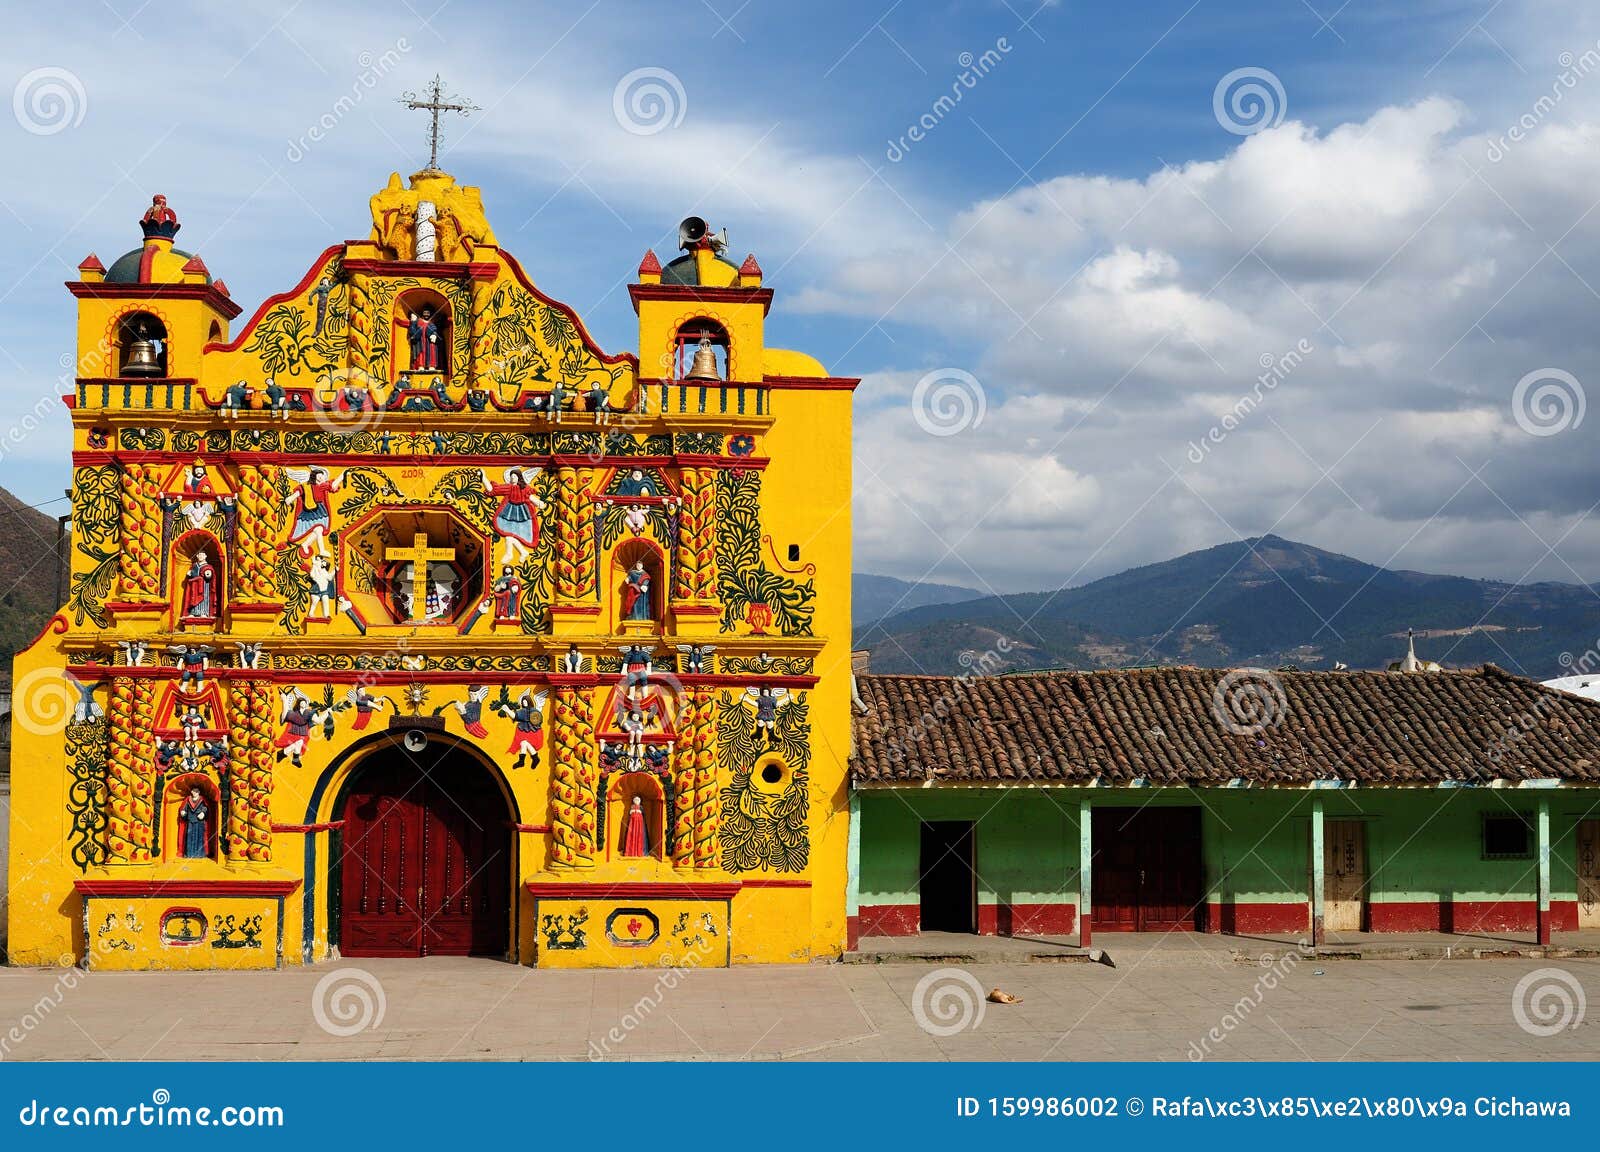 guatemala, view on the most colour facade church in guatemala